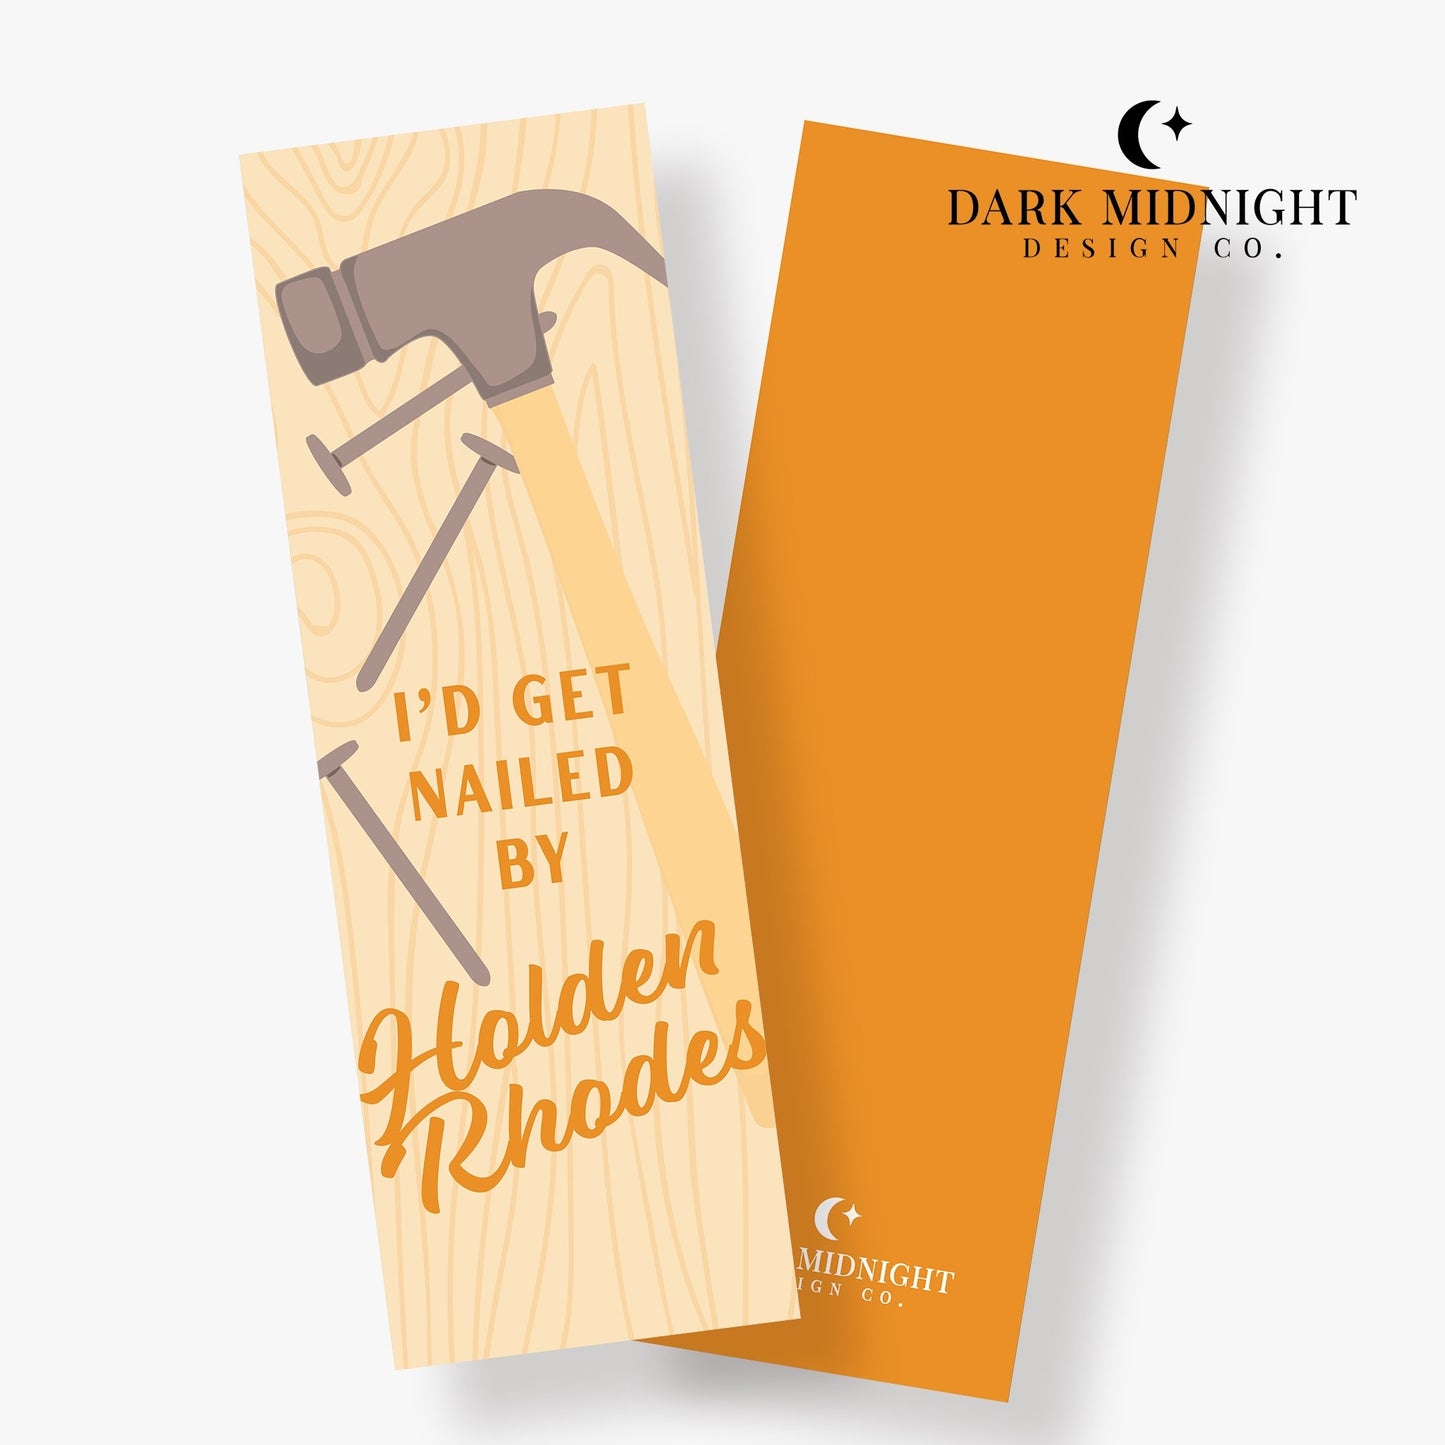 I'd Get Nailed By Holden Rhodes Bookmark - Officially Licensed Queen's Cove Series - Dark Midnight Design Co